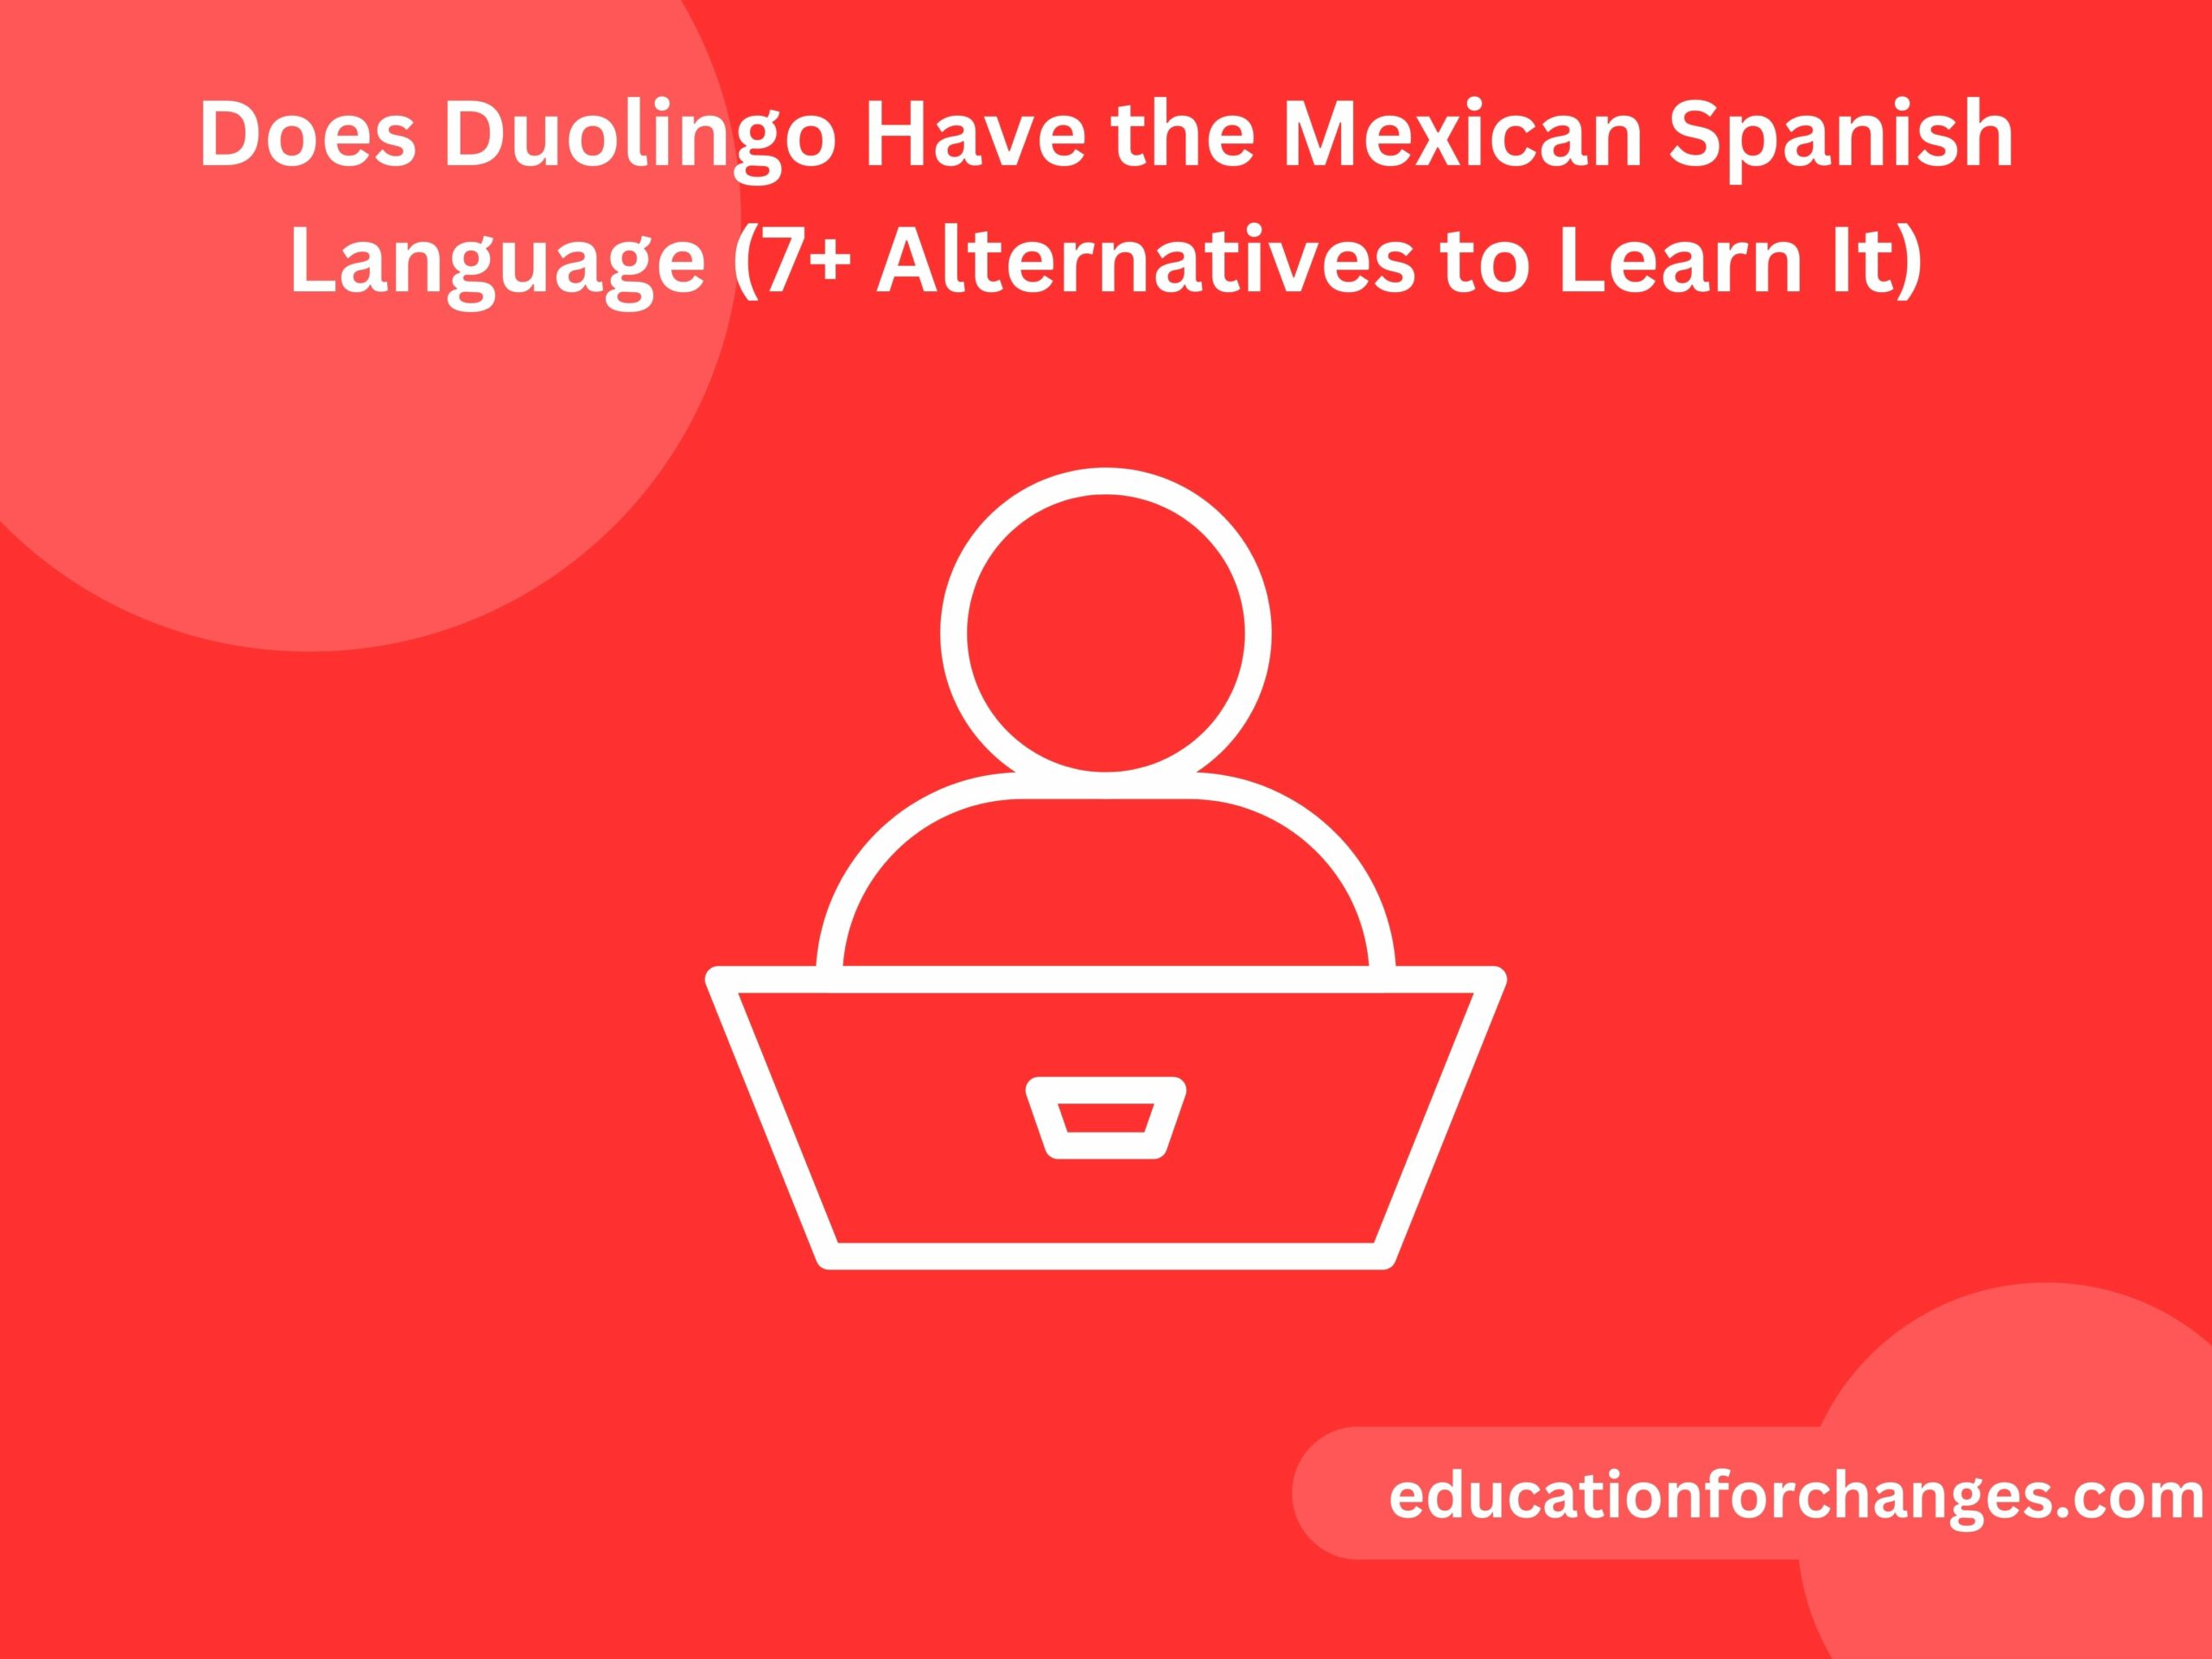 Does Duolingo have the Mexican Spanish? Duolingo is a platform that has a lot of popular languages including Spanish. As Spanish is part of the platform it is essential to understand if you will be learning American or Mexican Spanish. Duolingo provides the Spanish courses but in American Spanish. It means that you cannot learn Mexican Spanish on Duolingo. Of course, it does not mean that you cannot learn the language. Further, I have mentioned various alternatives by which you can learn the Mexican Spanish language.